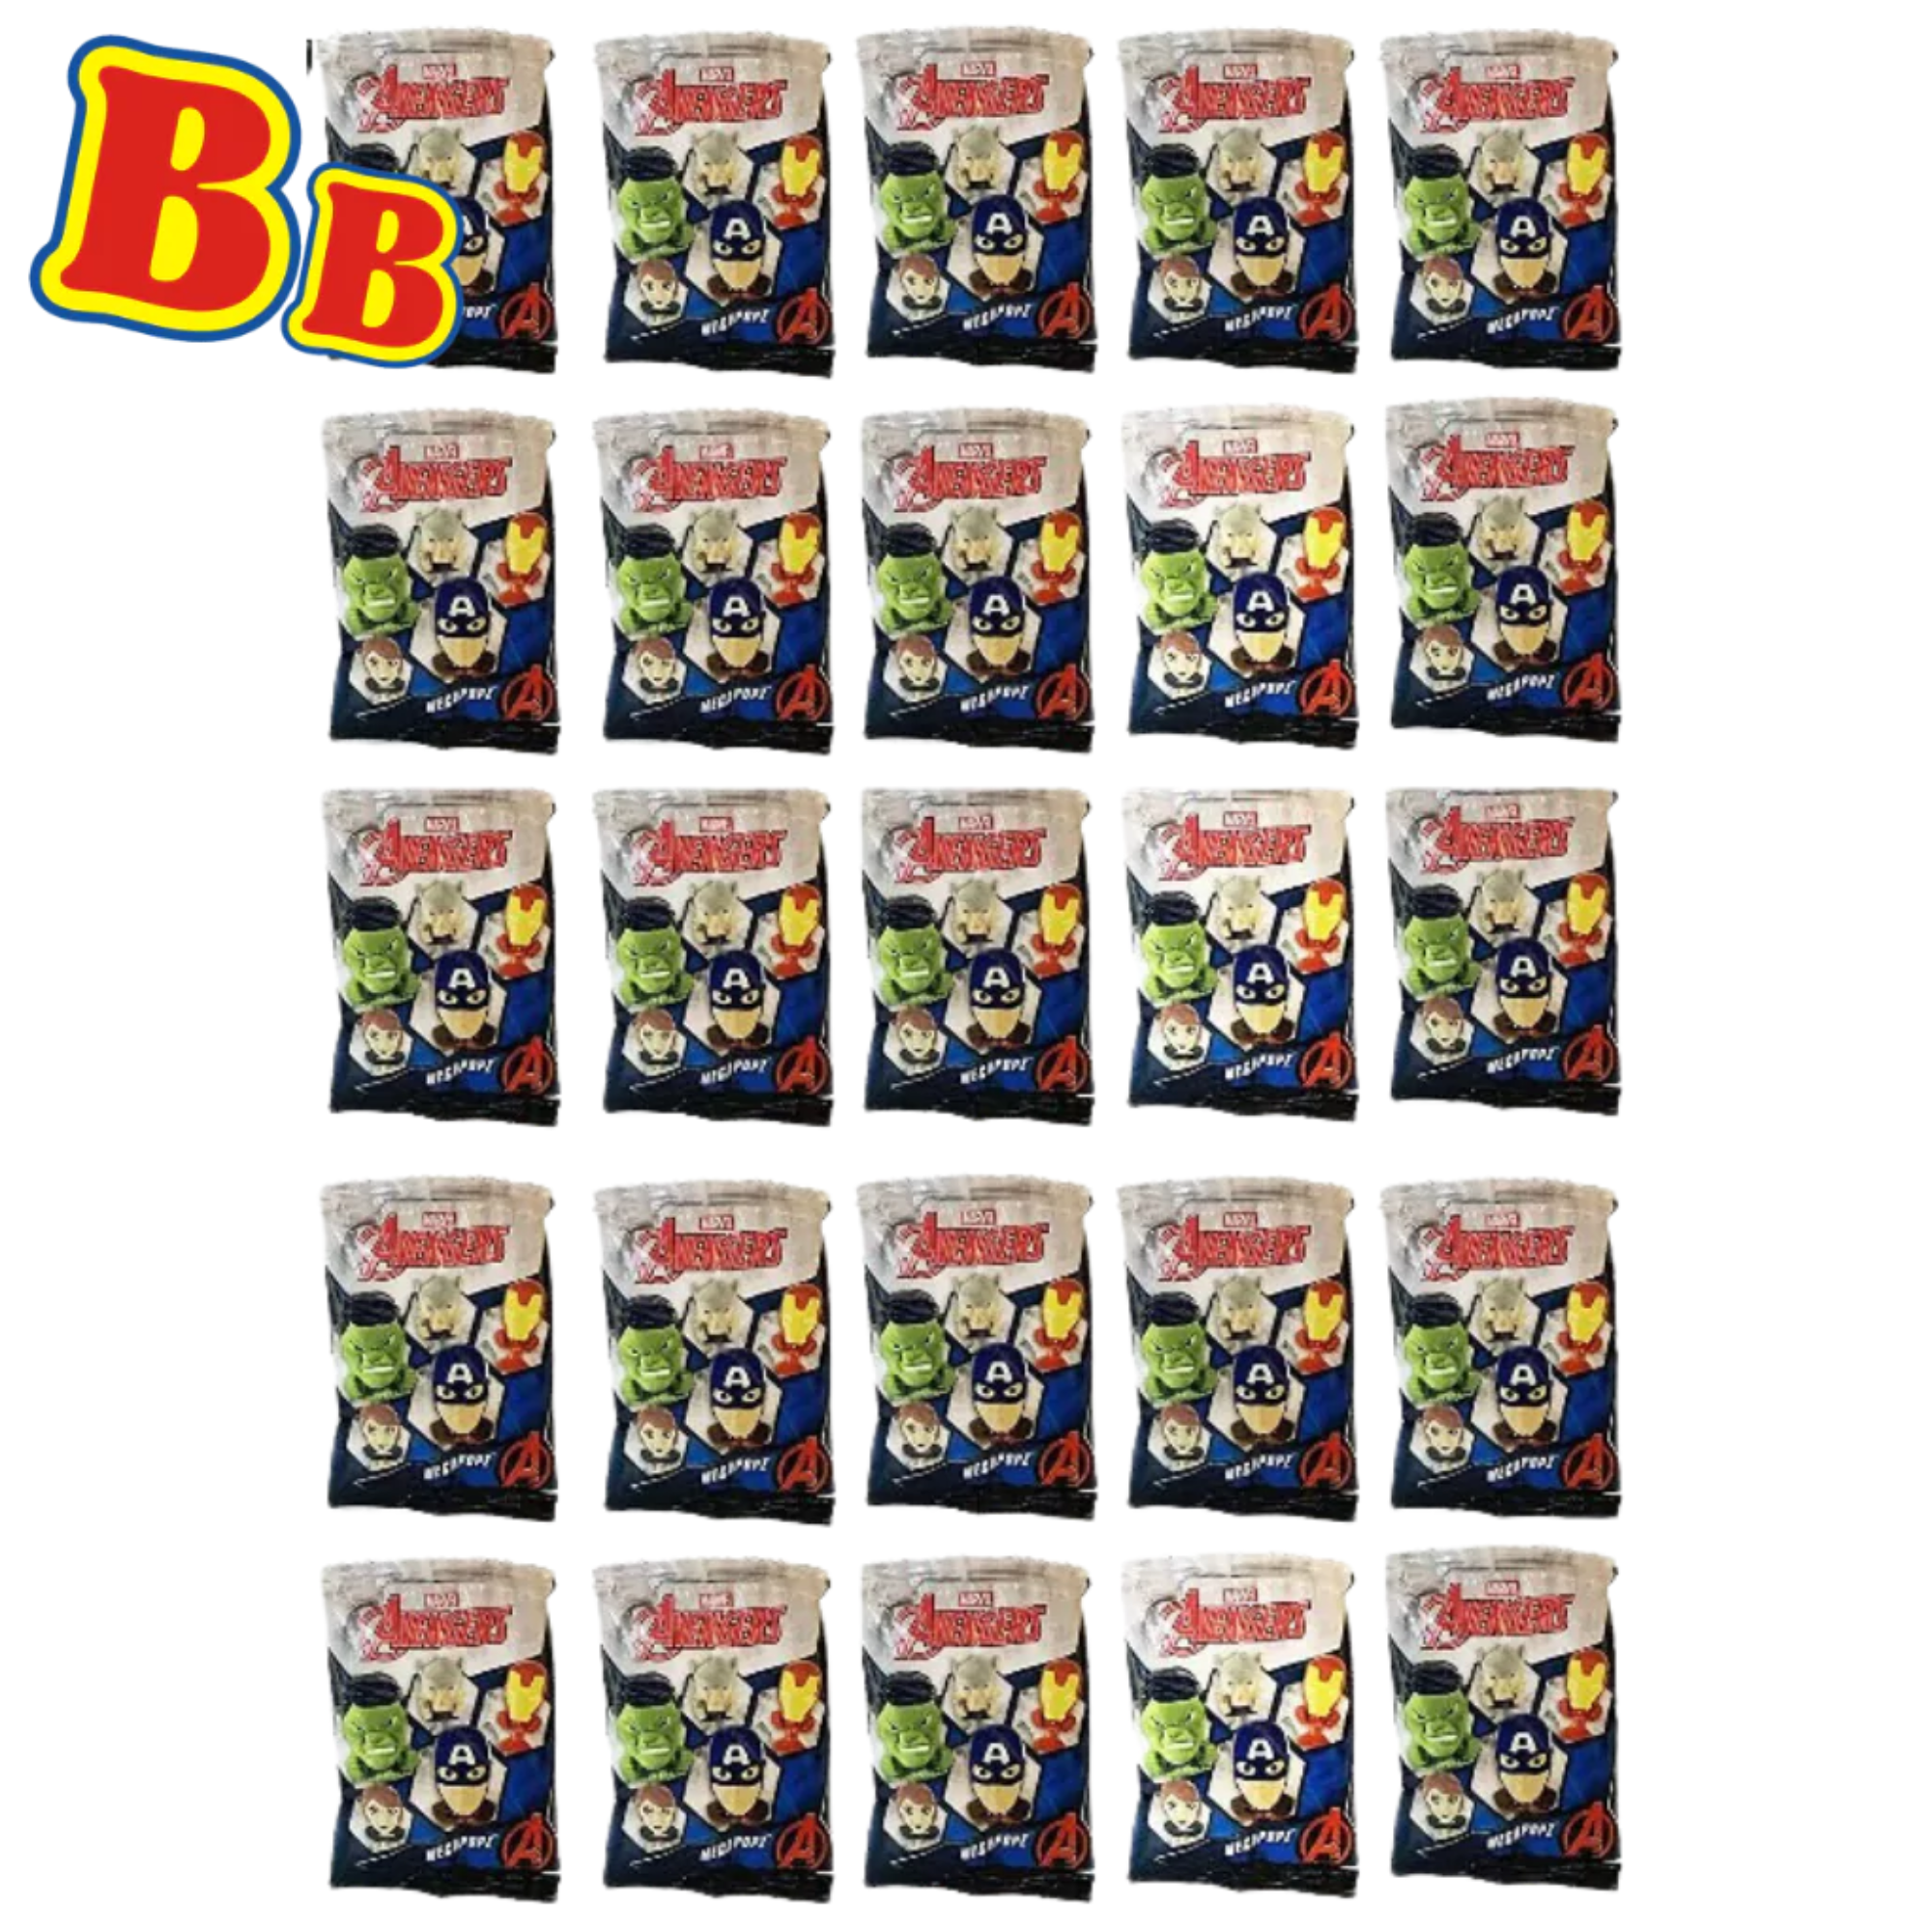 Marvel Avengers Megapopz Collectable Figure Heads Blind Party Bags 25 Pack - Toptoys2u